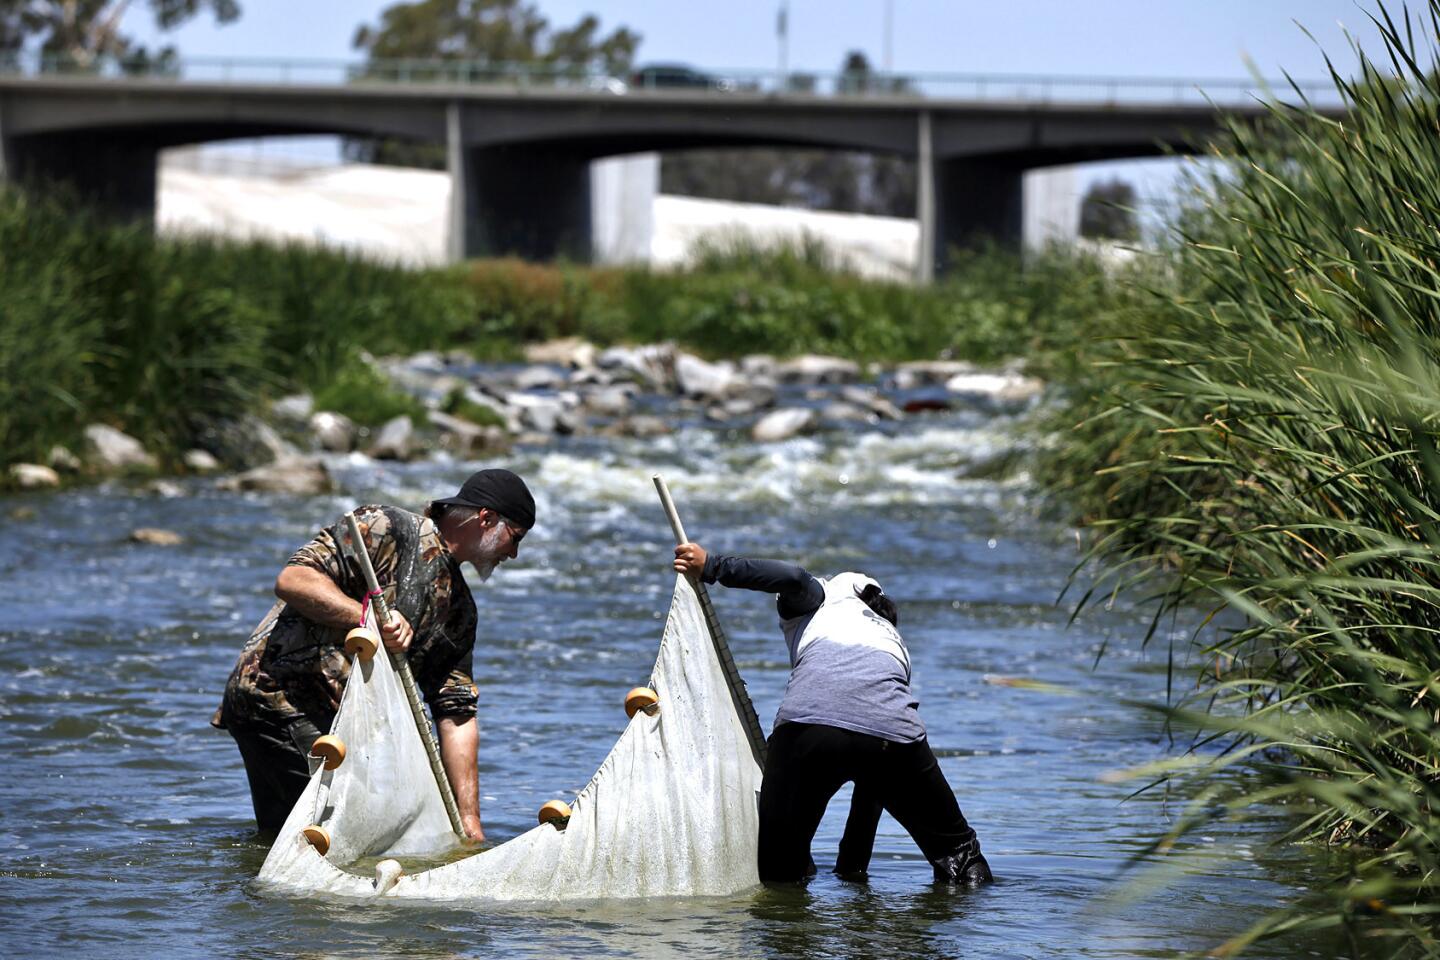 Searching for elusive steelhead trout in the Los Angeles River